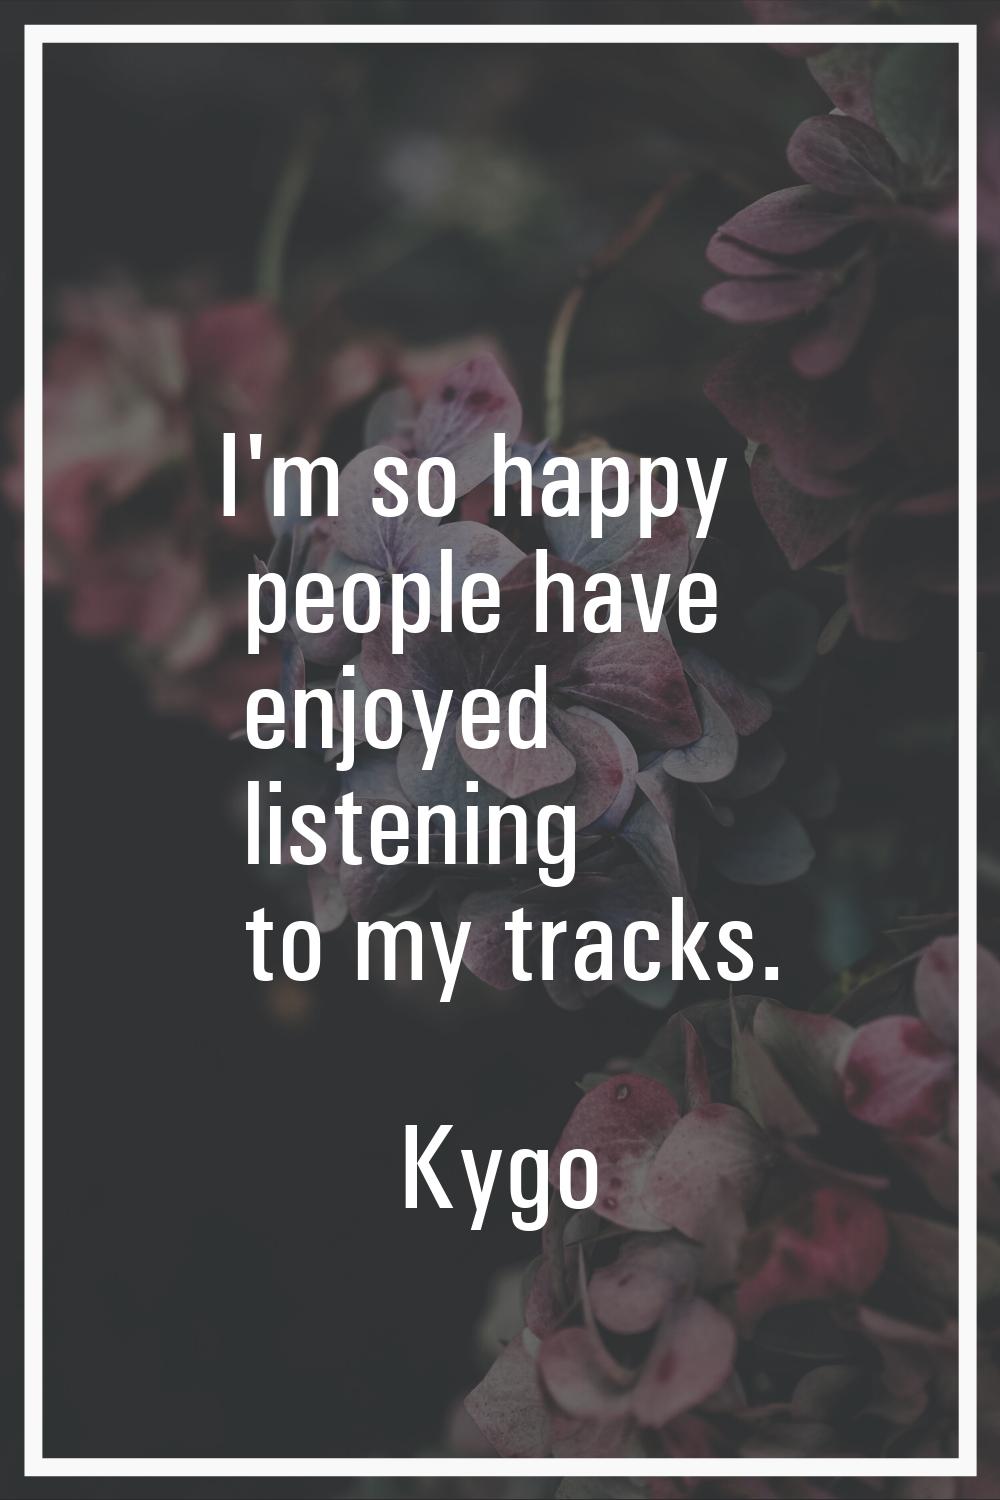 I'm so happy people have enjoyed listening to my tracks.